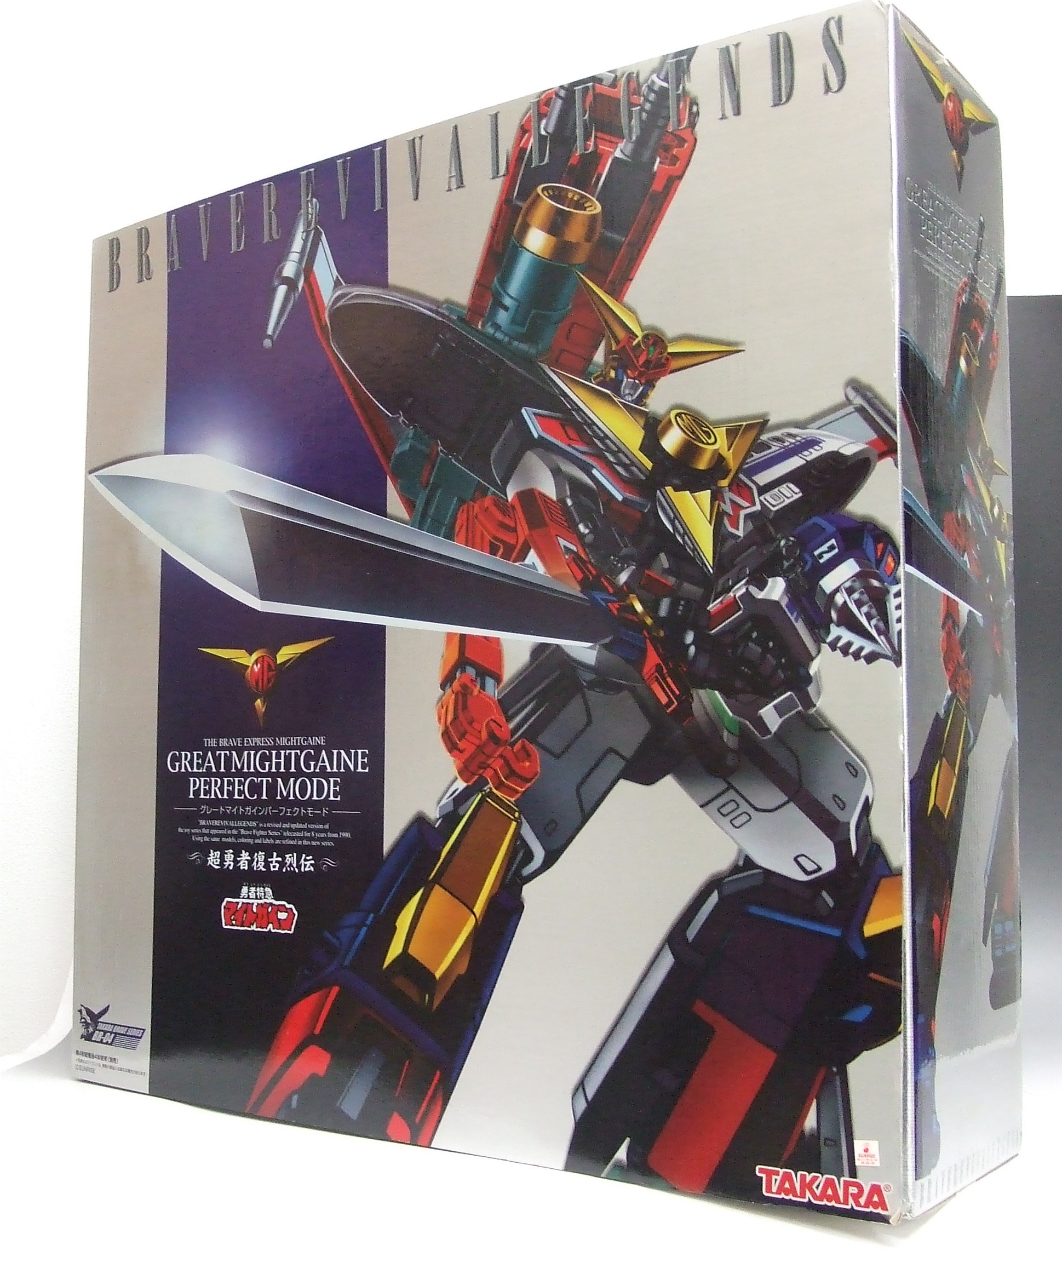 TAKARA The Barve Express Might Gaine BR-04 - Revival Legend Great Might Gain Perfect Mode